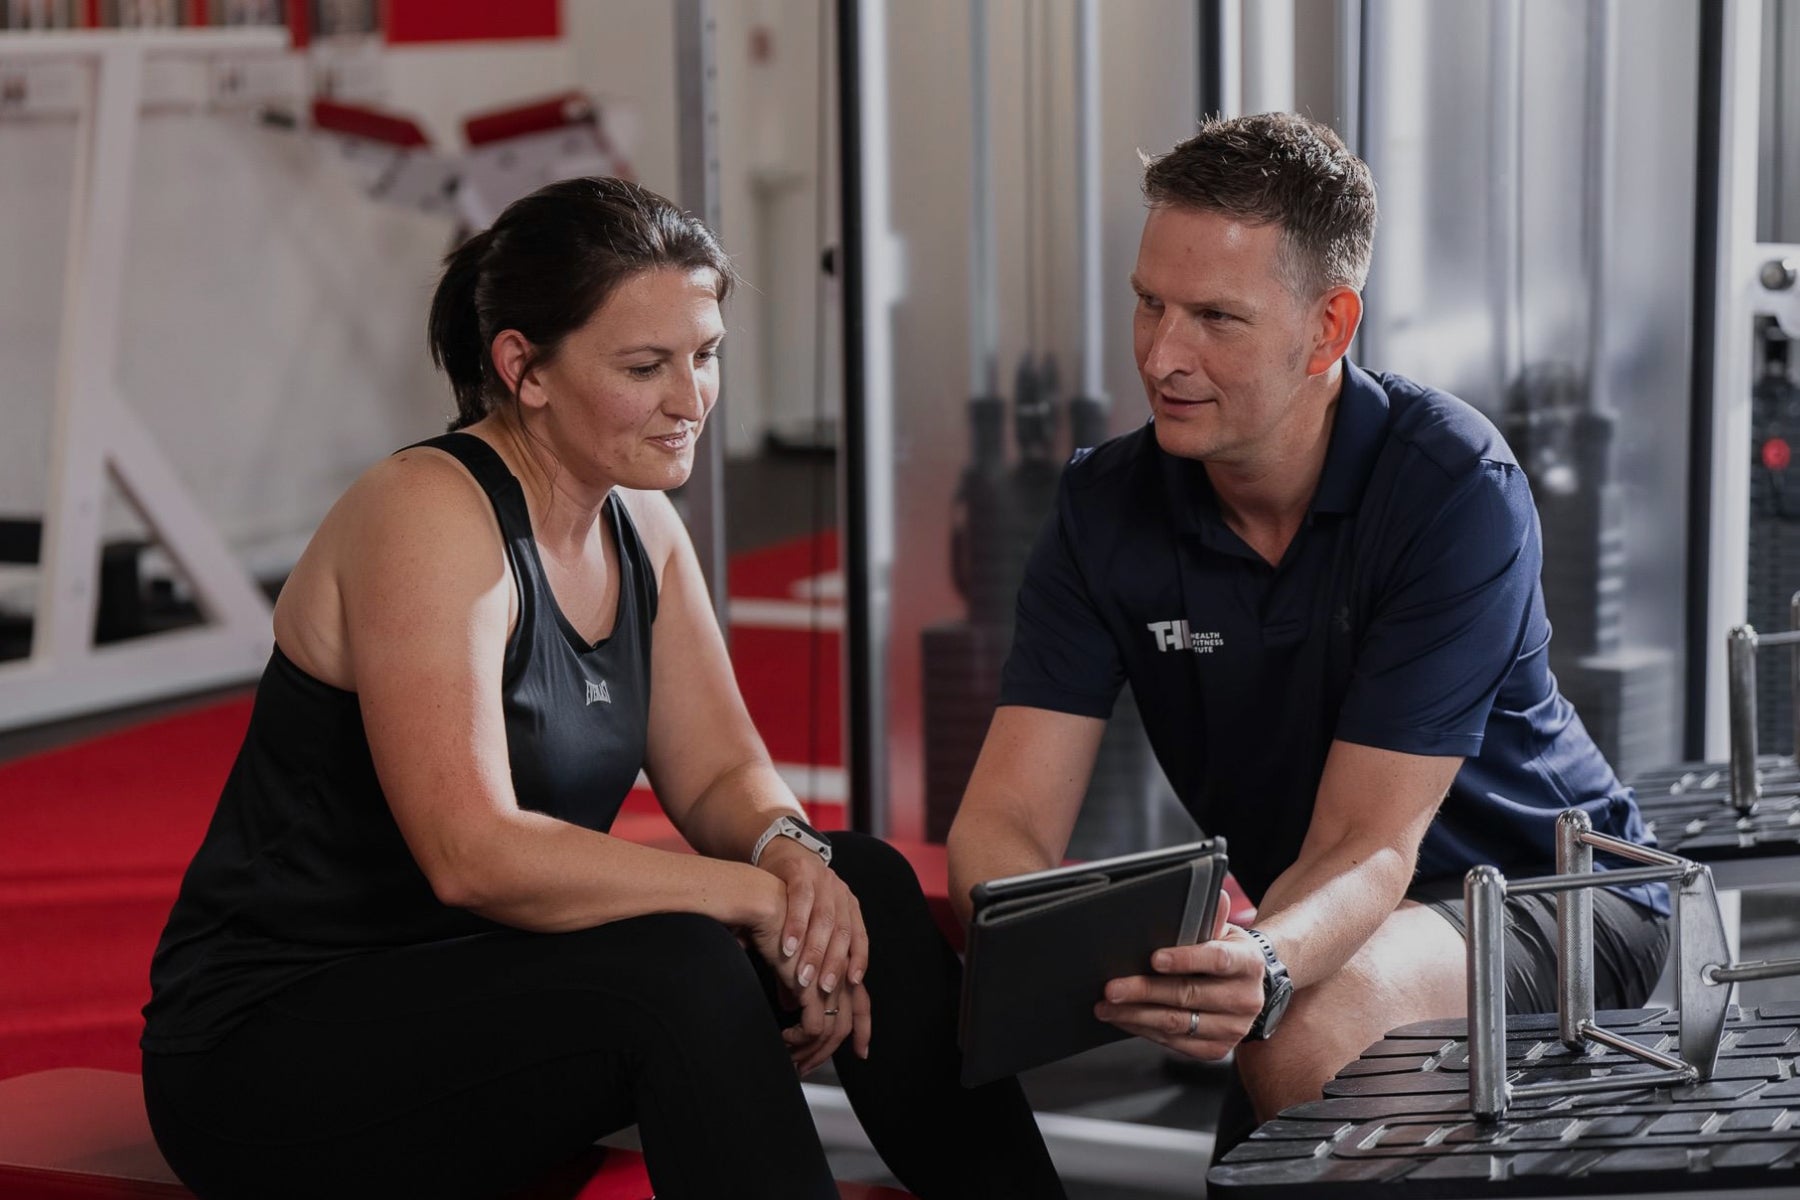 How to Become a Sports Nutritionist